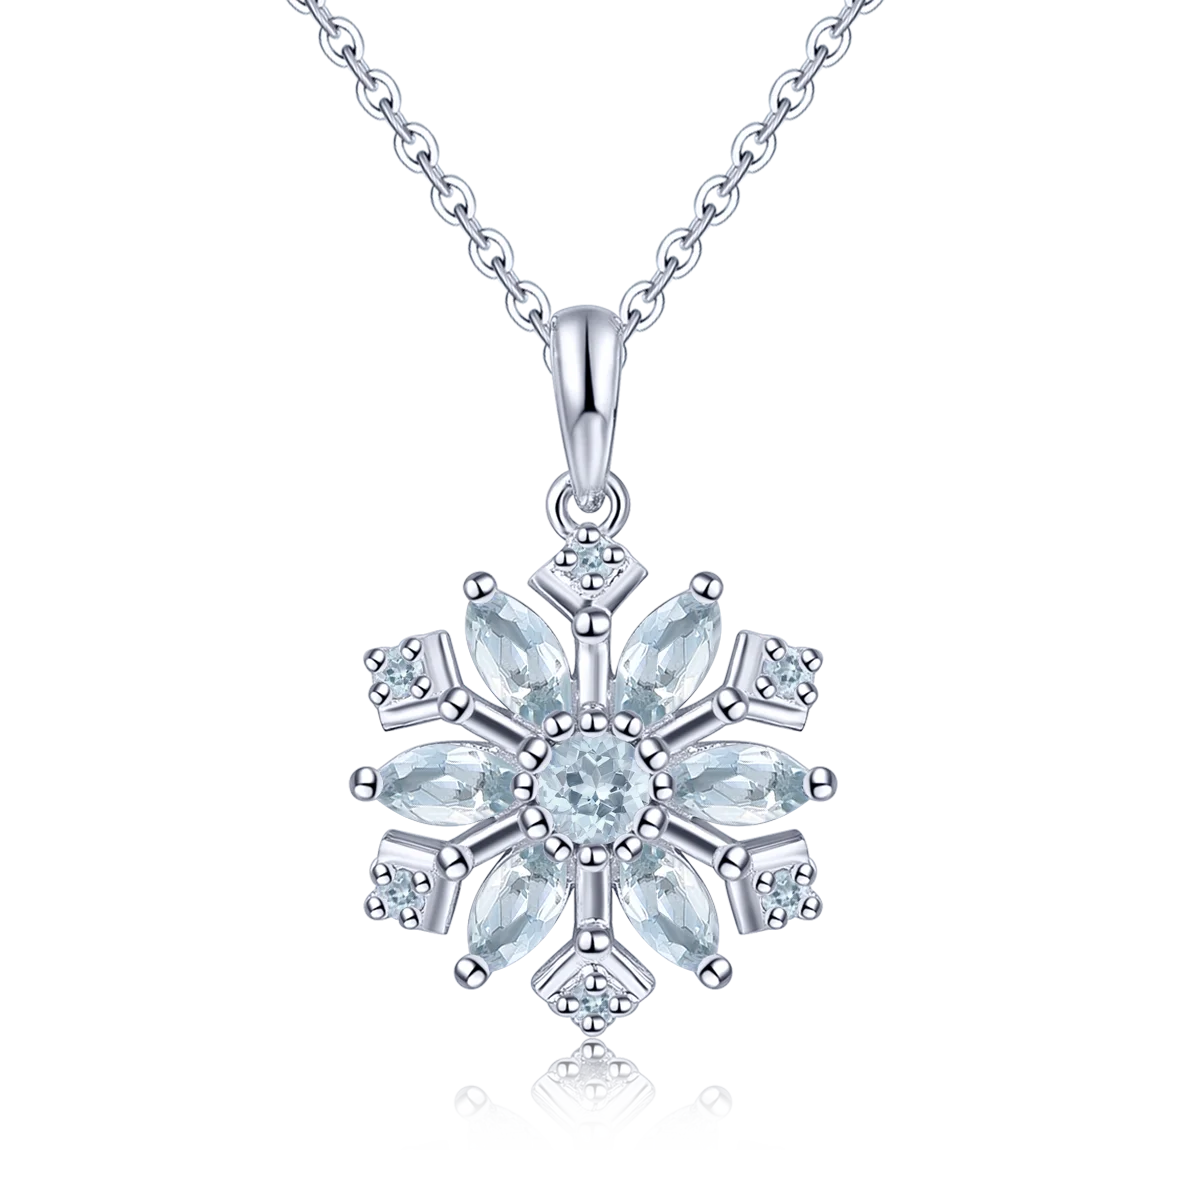 BOEYCJR 925 Silver Snowflake Natural Aquamarine 0.98ct total Pendant Necklace for Women Anniversary Gift